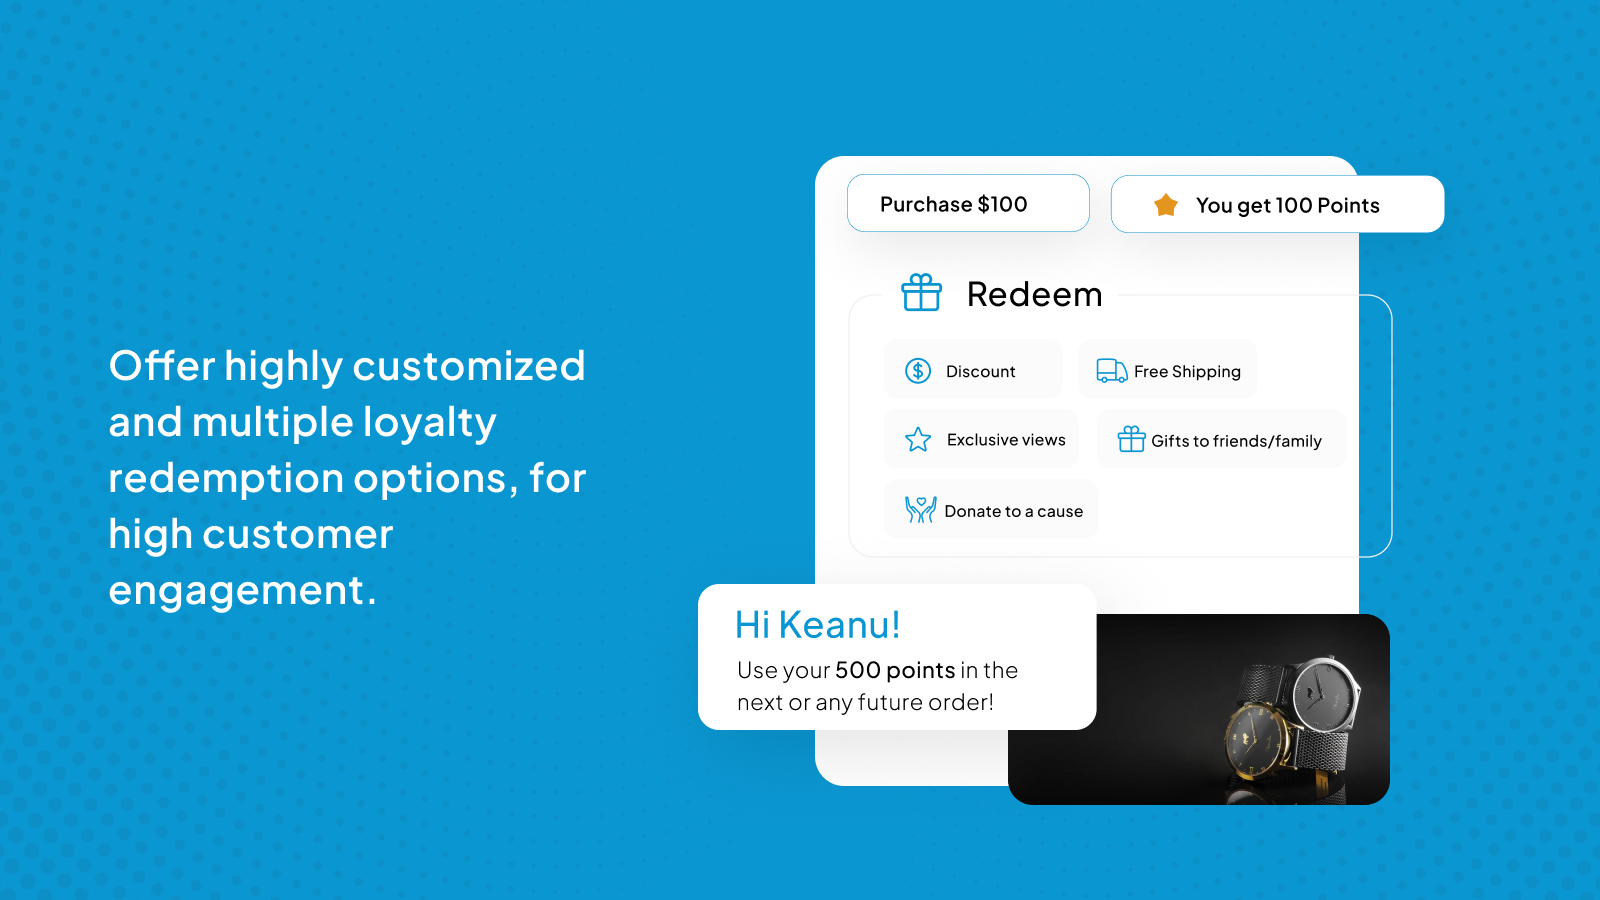 Offer highly customized and multiple loyalty redemption options